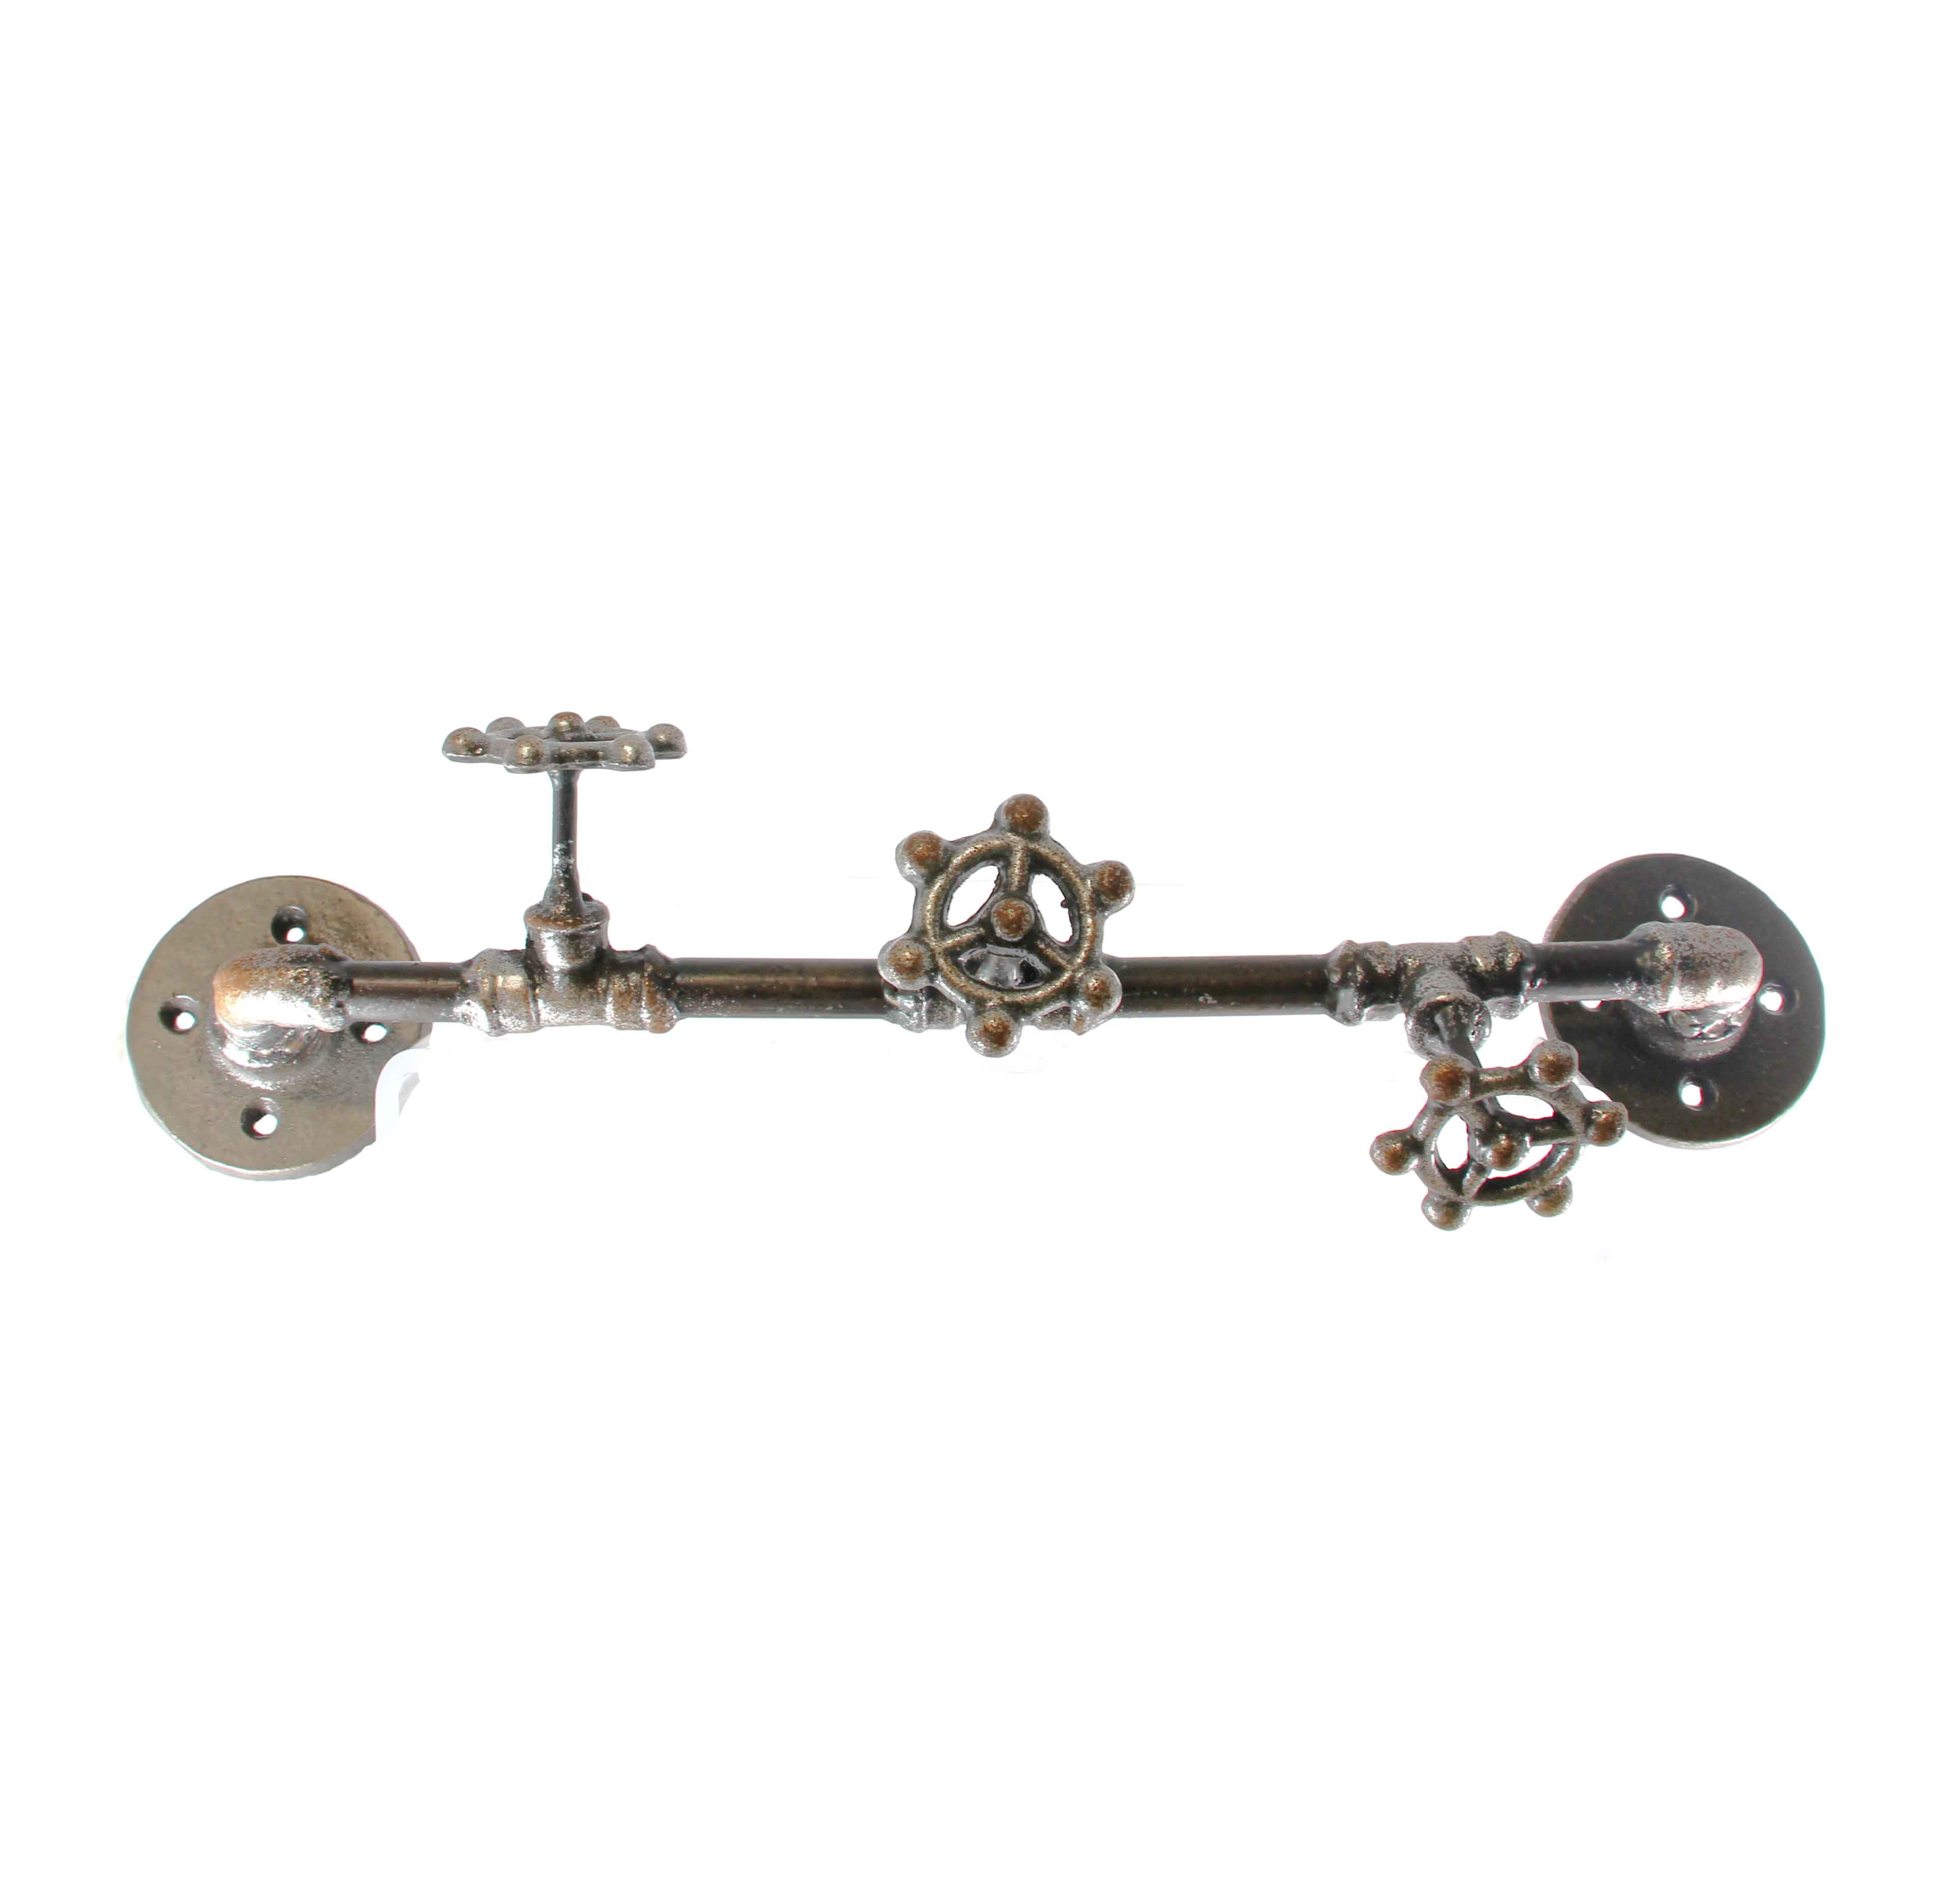 Iron Pipe Wall Hook with Faucet Knobs